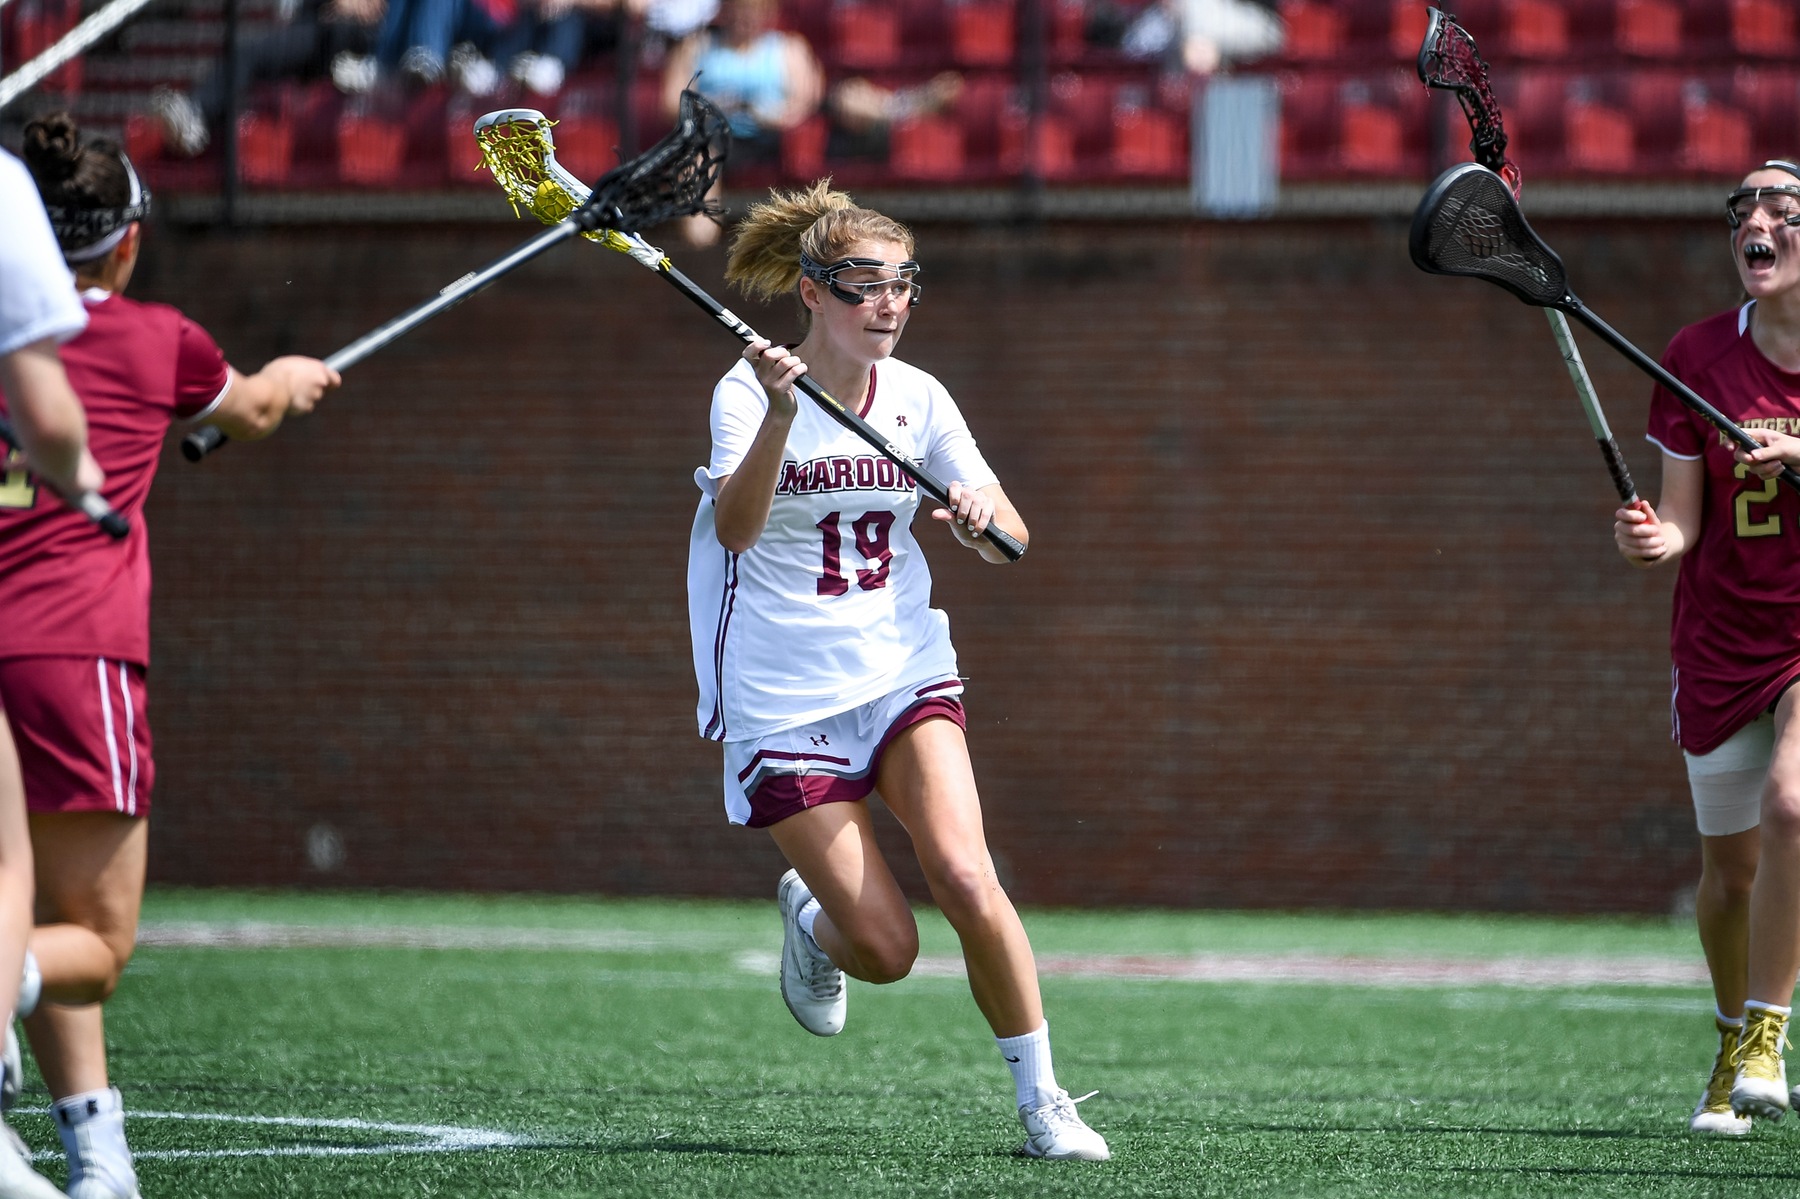 Emerson Foster and Ellie Armstrong each scored six goals as Roanoke topped Oberlin 20-7 in women’s lacrosse on Sunday. 